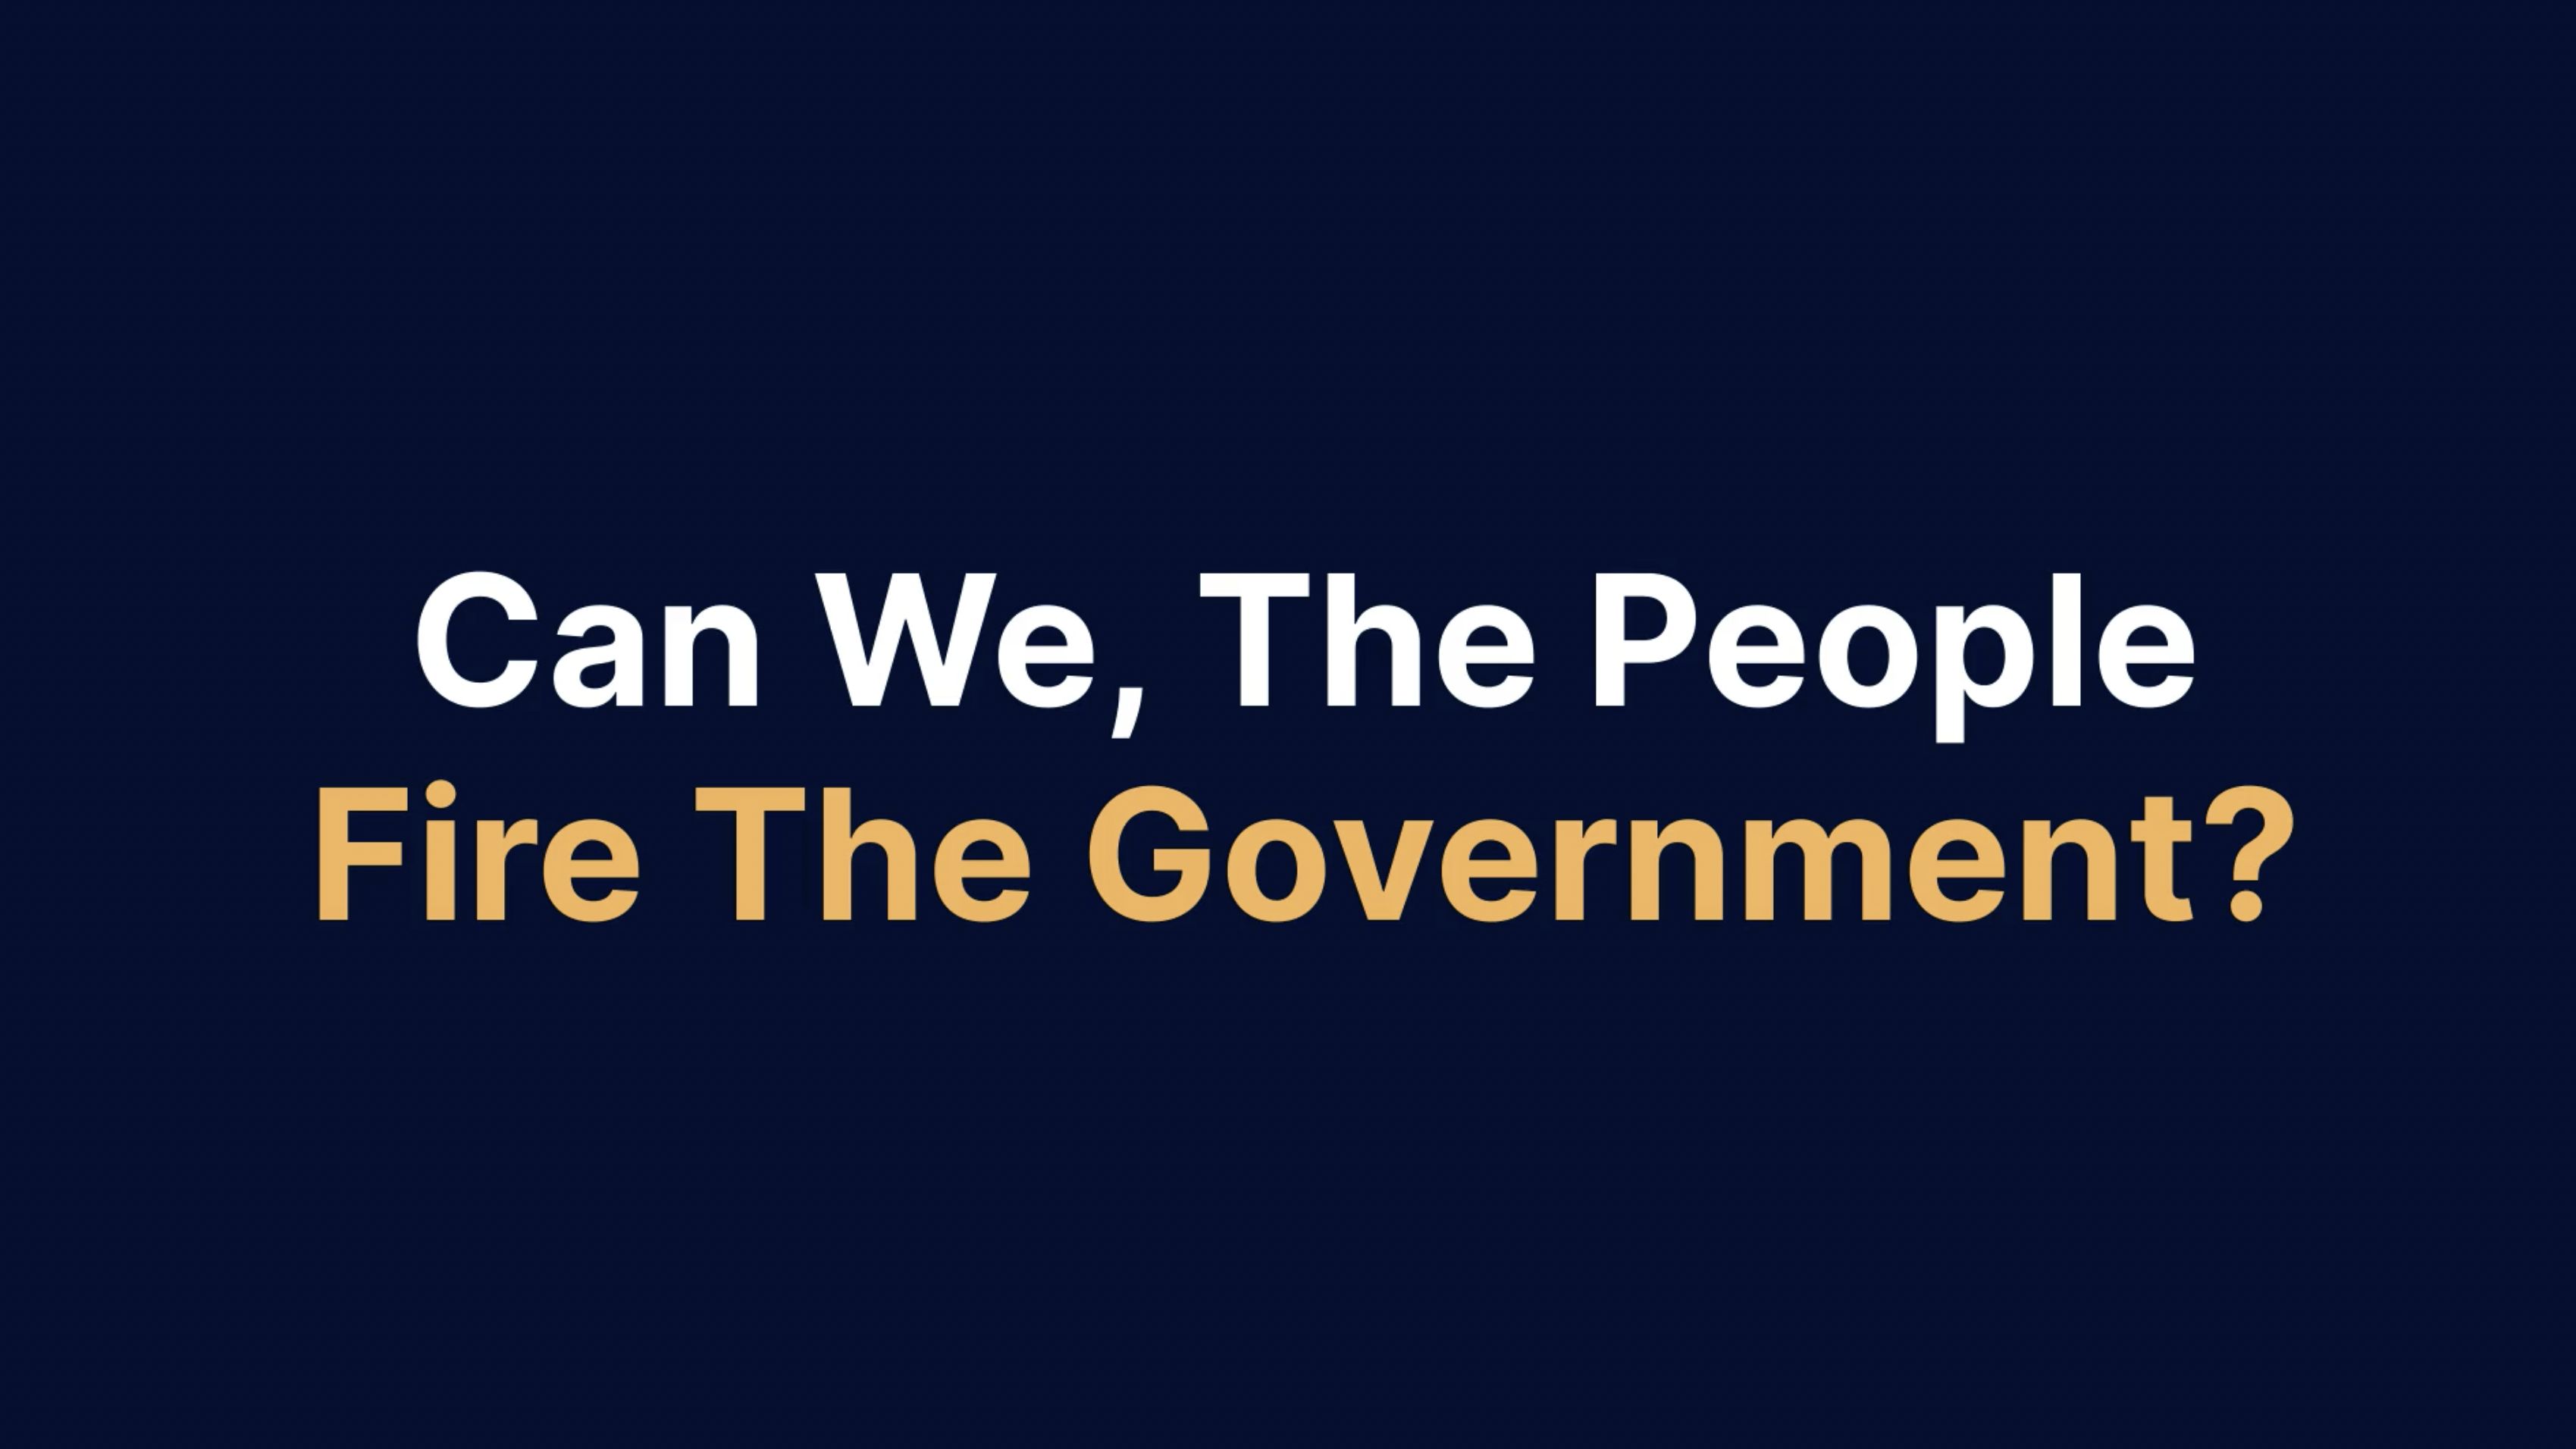 Can We, The People, Fire the Government?